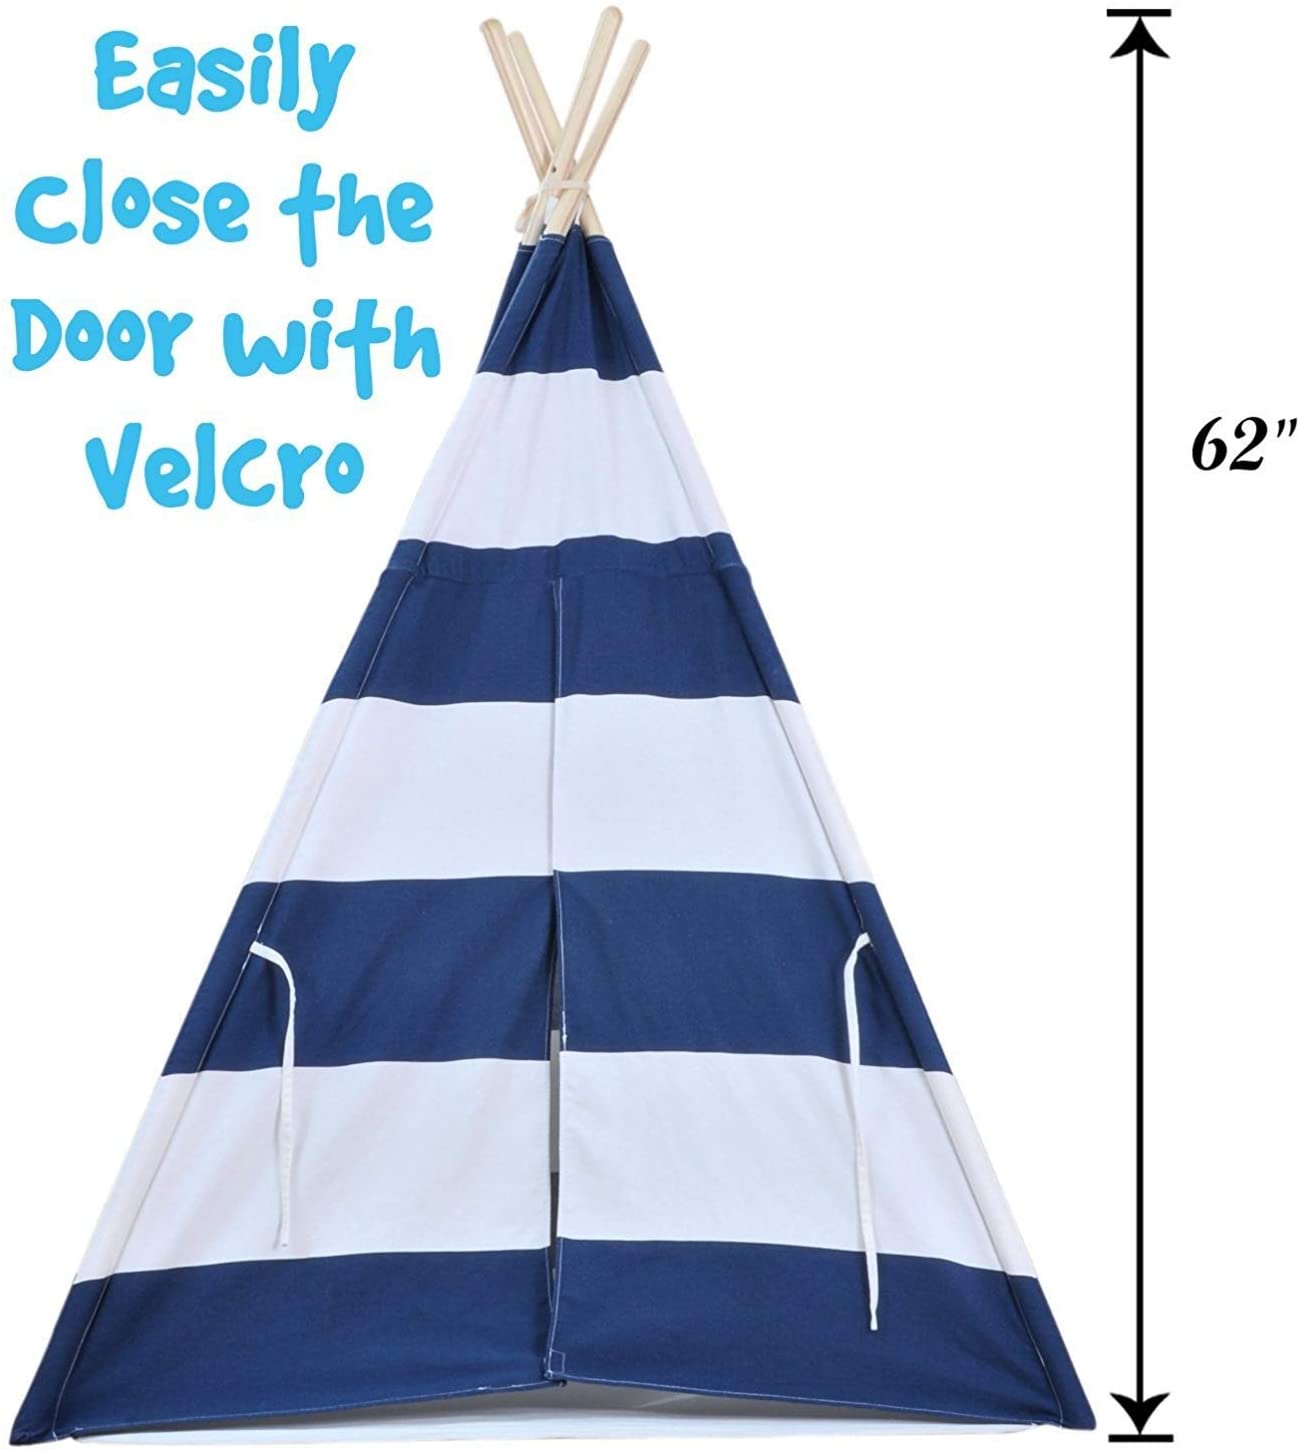 Kids Teepee Tent for Kids, No Toxic Chemicals Added, w/ Carrying Case, Navy Children's Teepee Tent for Boys & Girls, Large Enough Tipi Tents for Adults Toddler Baby Boy Adult Children, Reading Nook